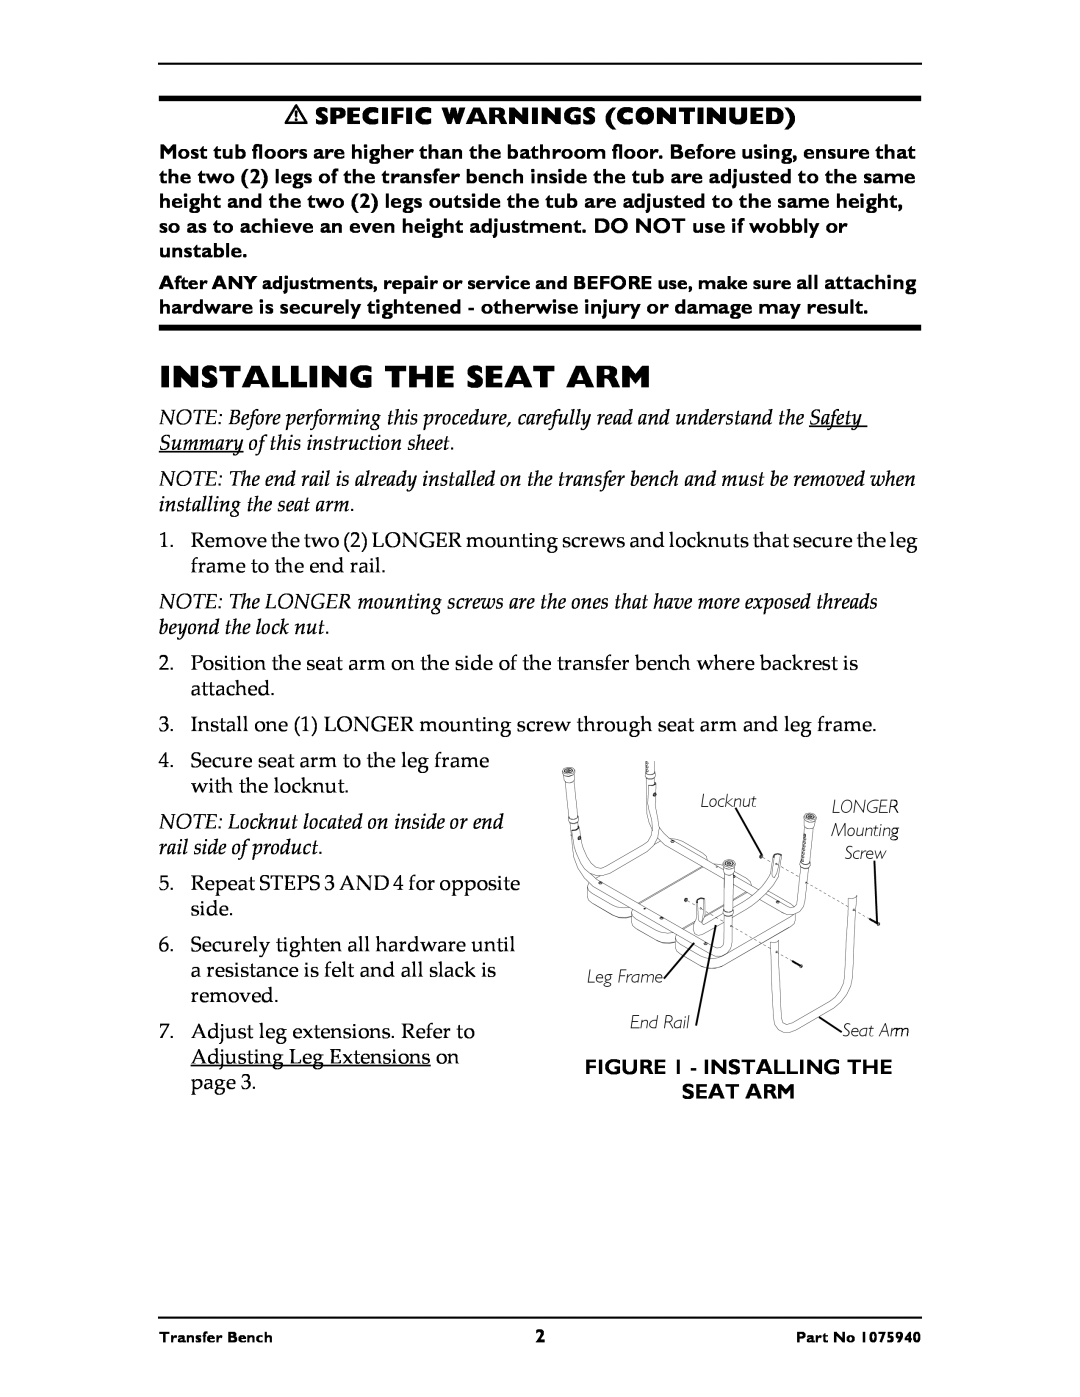 Invacare 9871, 9873, 98070 instruction sheet Installing The Seat Arm, Specific Warnings Continued 